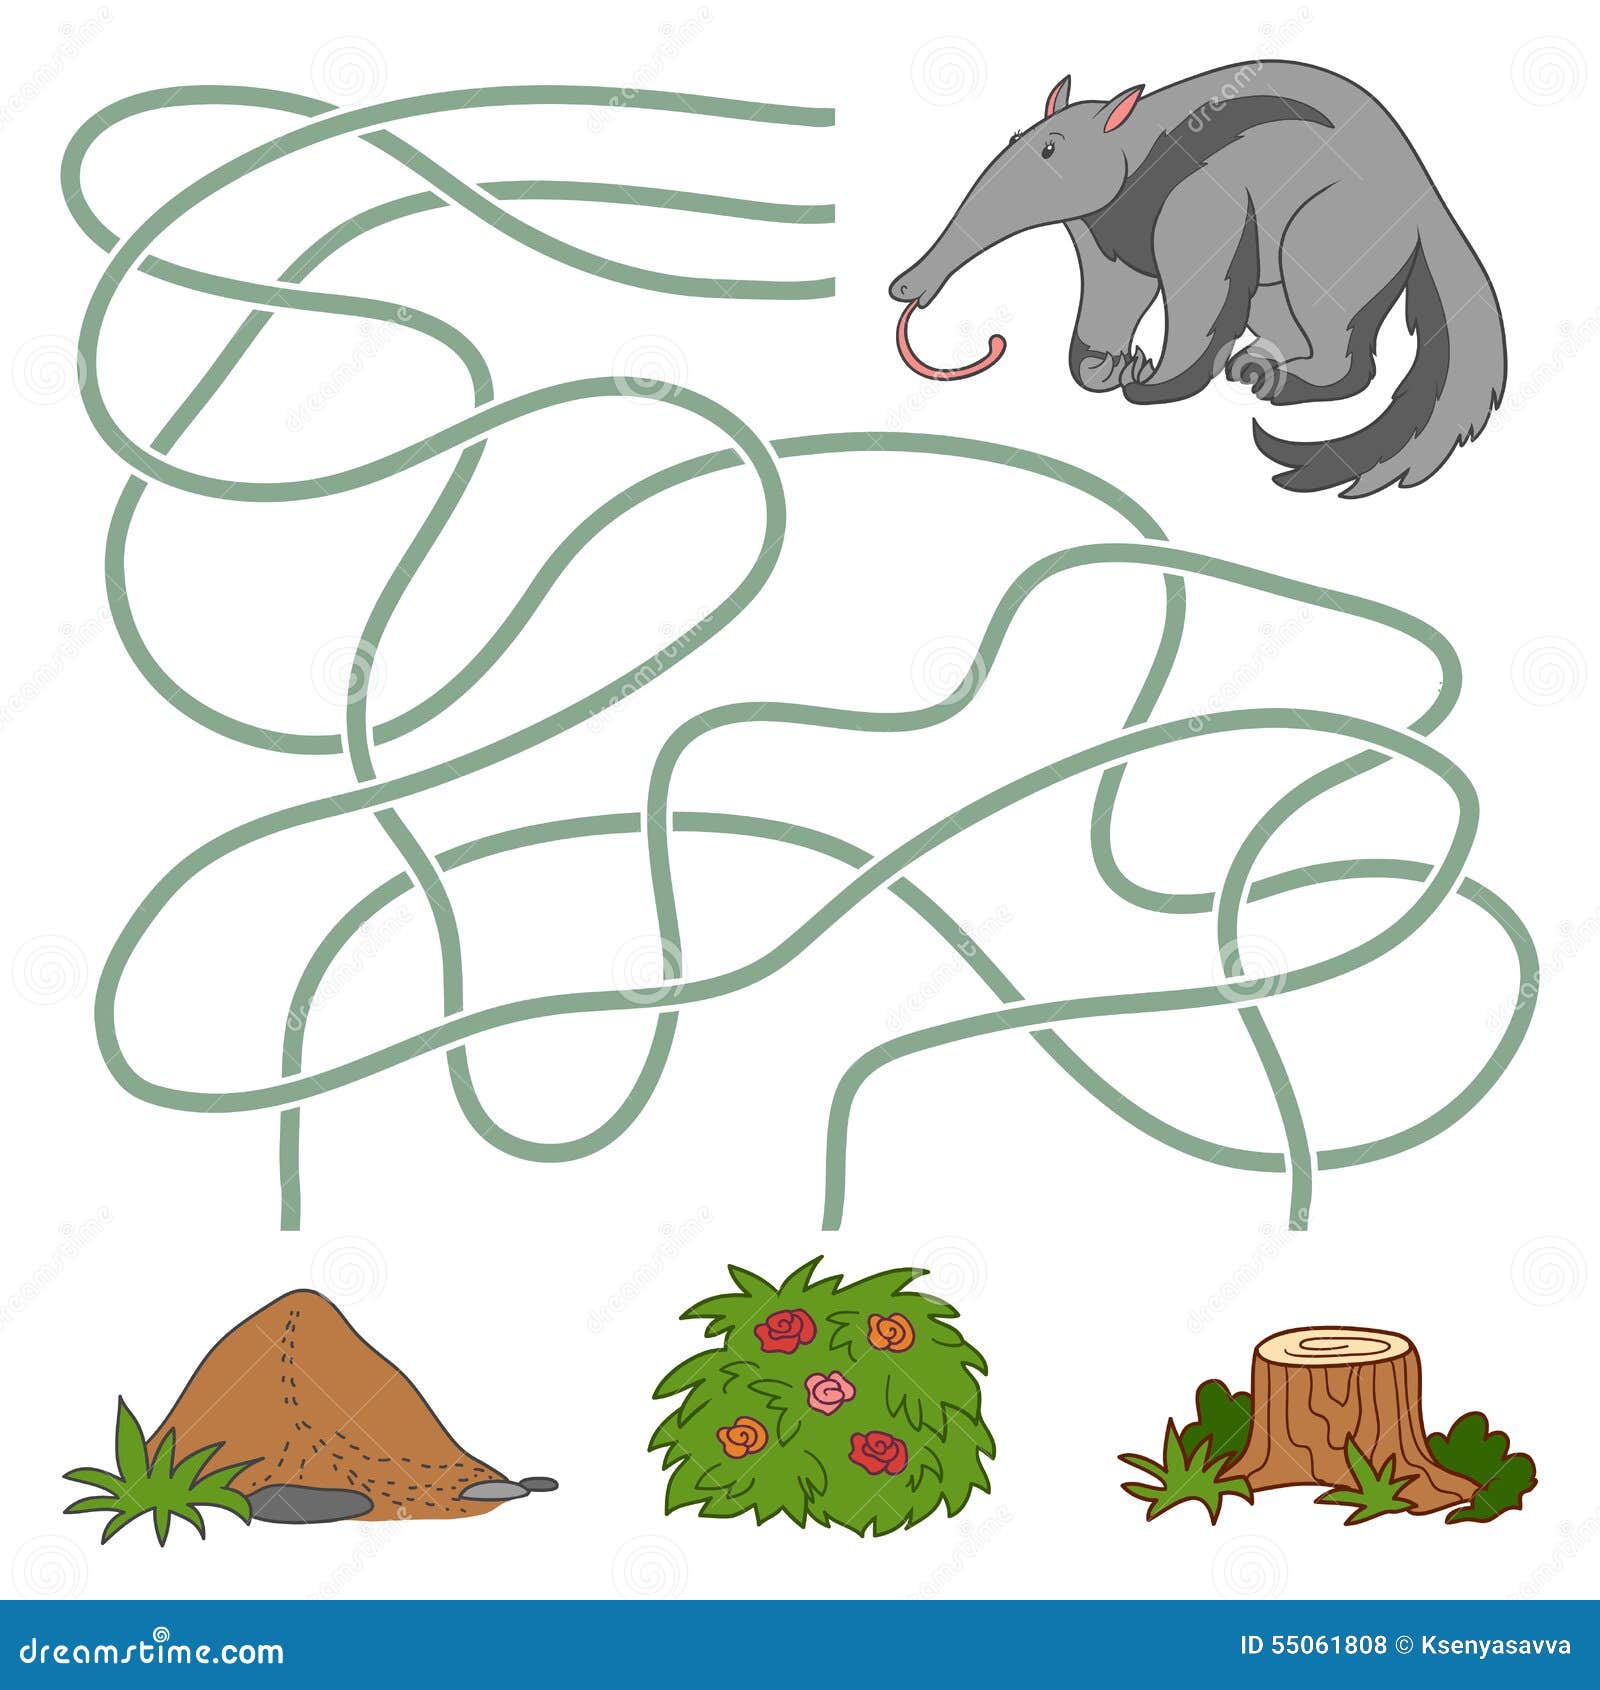 maze game: anteater and anthill